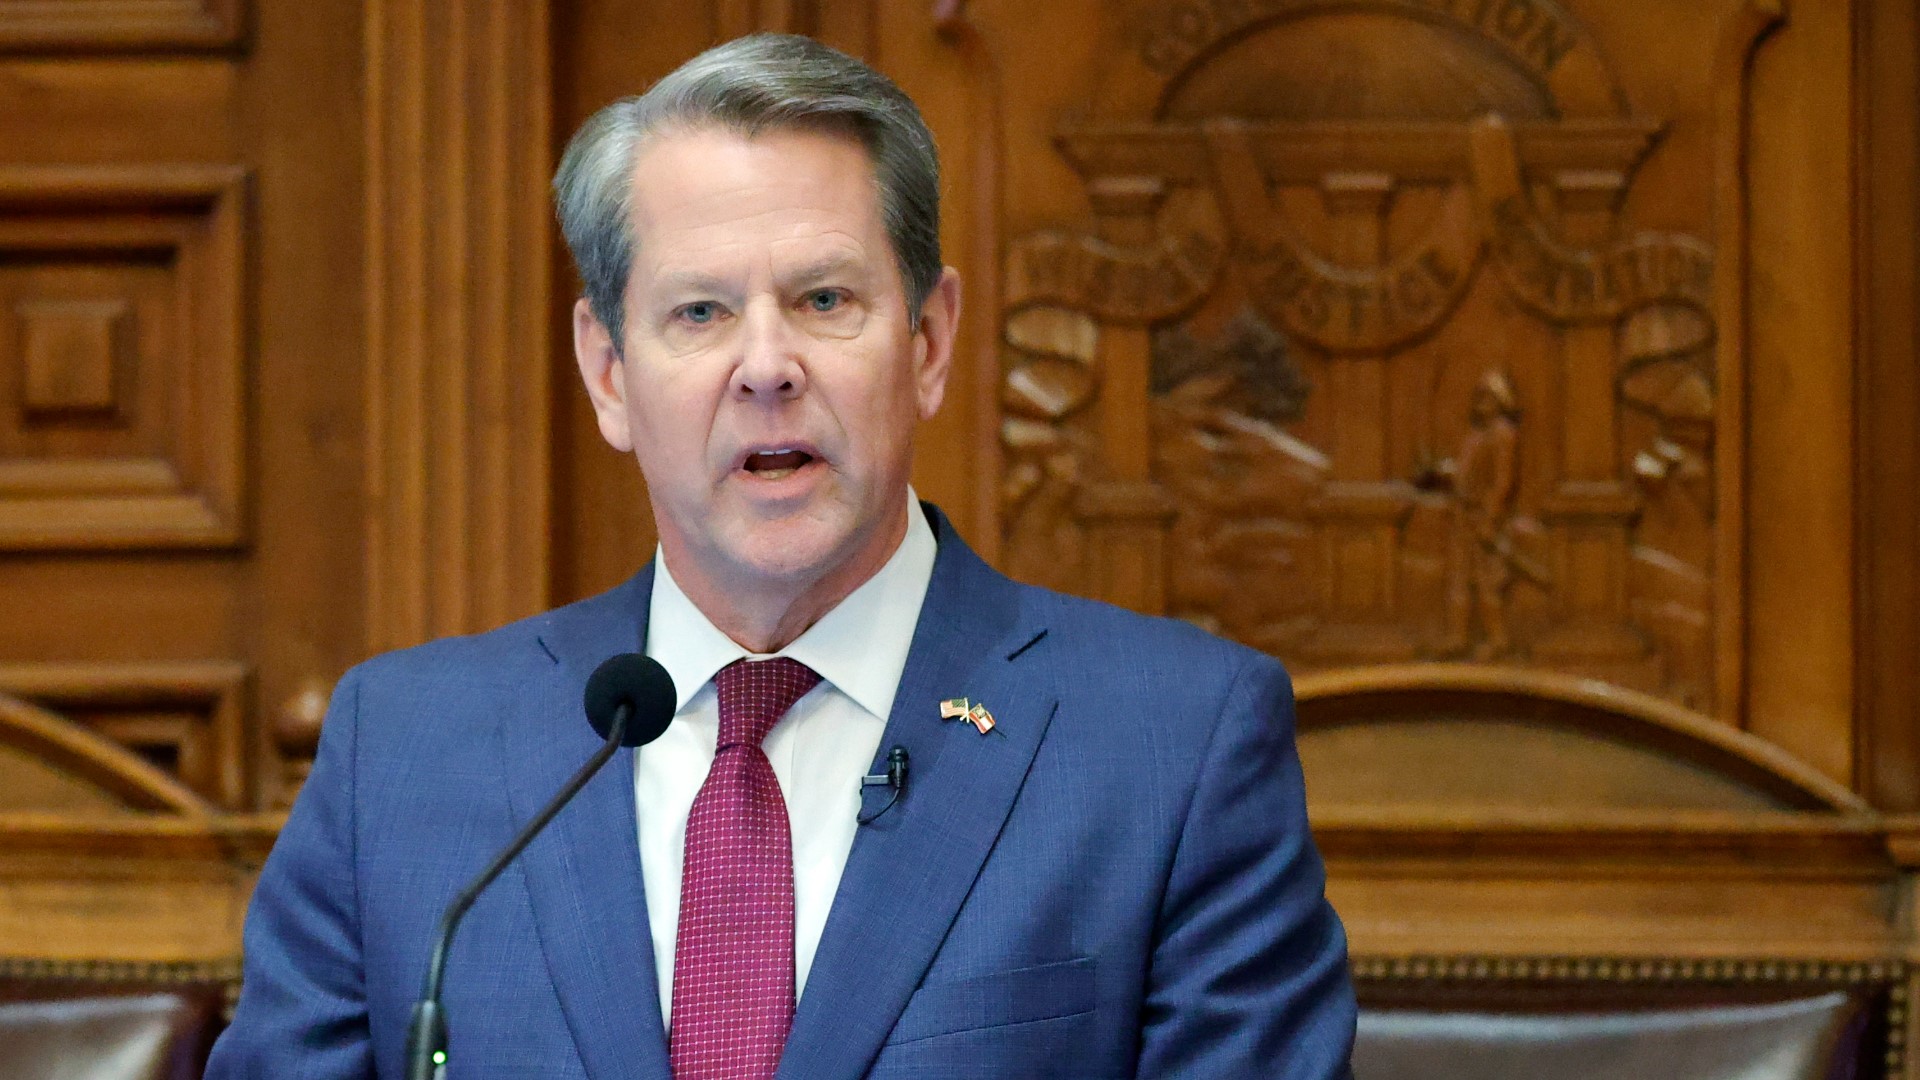 Georgia Gov. Brian Kemp gave his State of the State address in front of Georgia's General Assembly on Wednesday morning.